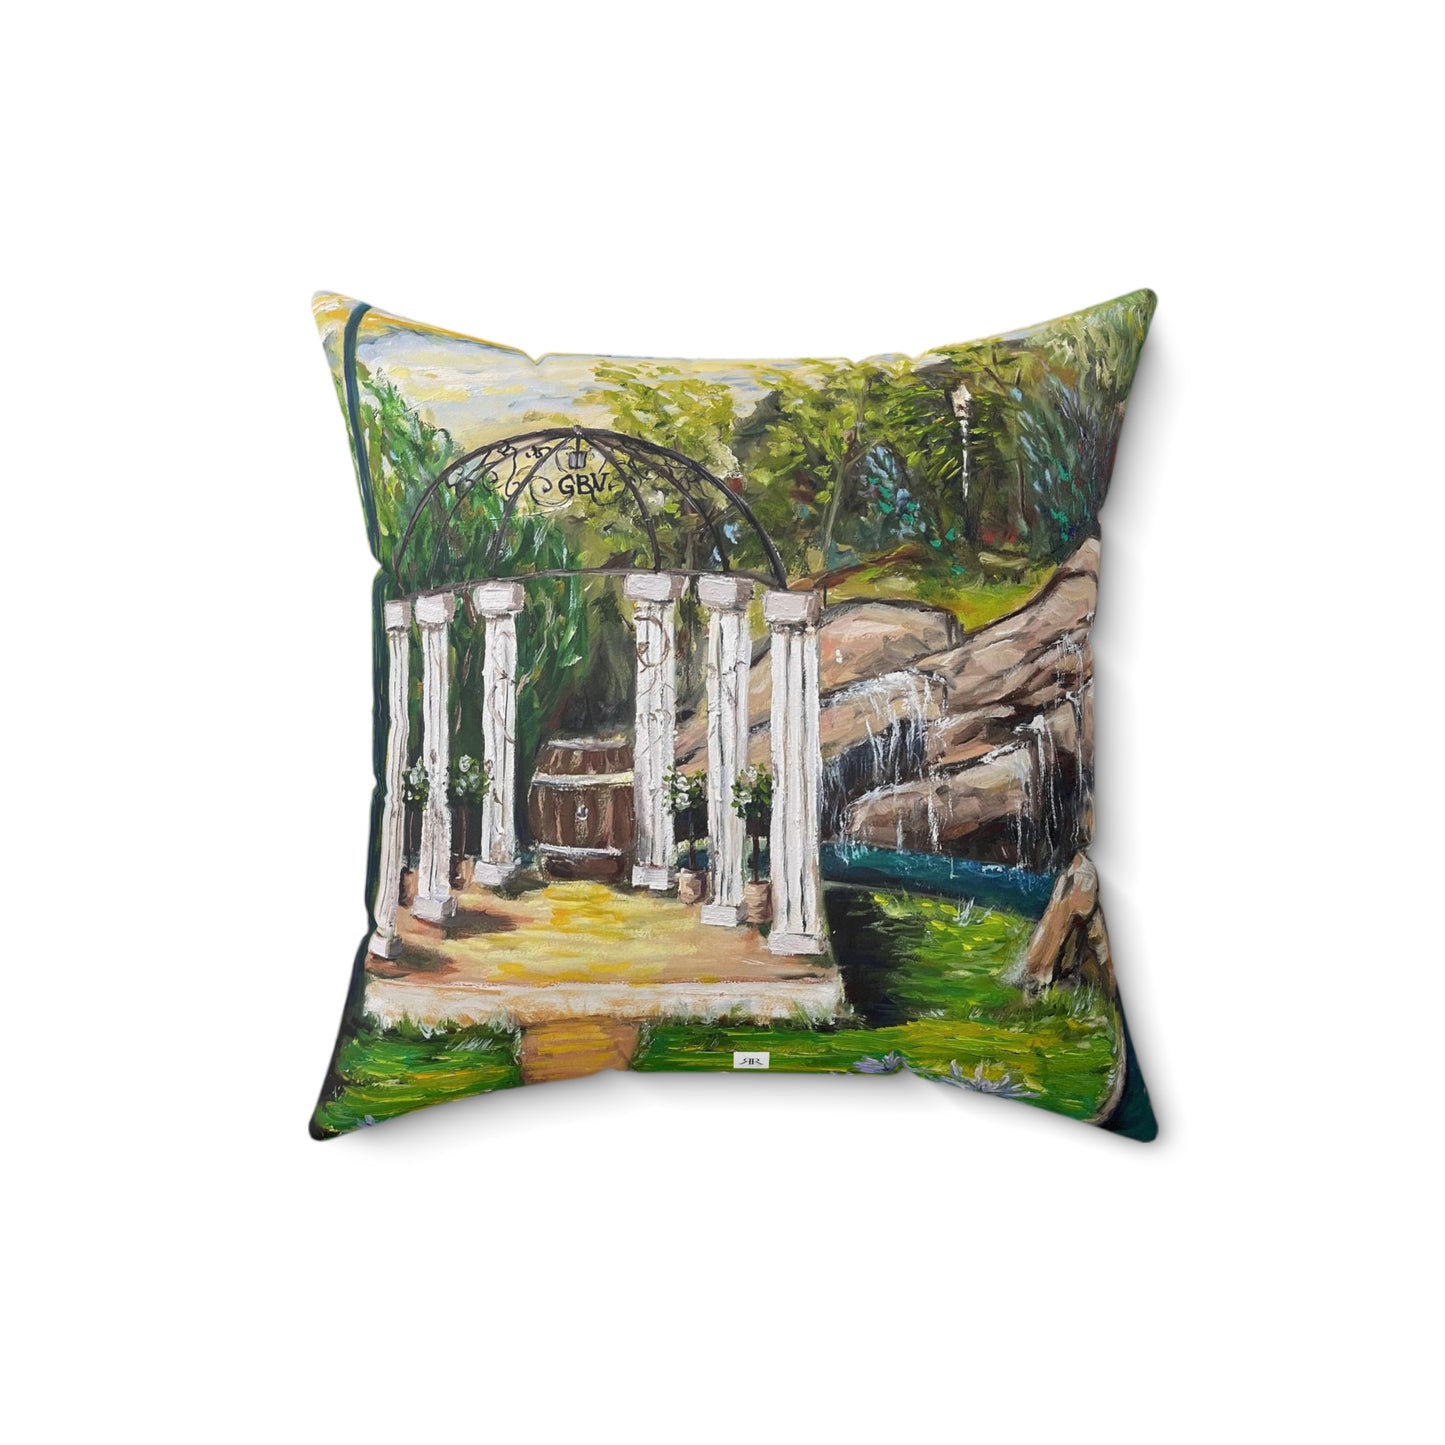 The Pergola (Wedding Alter) at GBV Indoor Spun Polyester Square Pillow